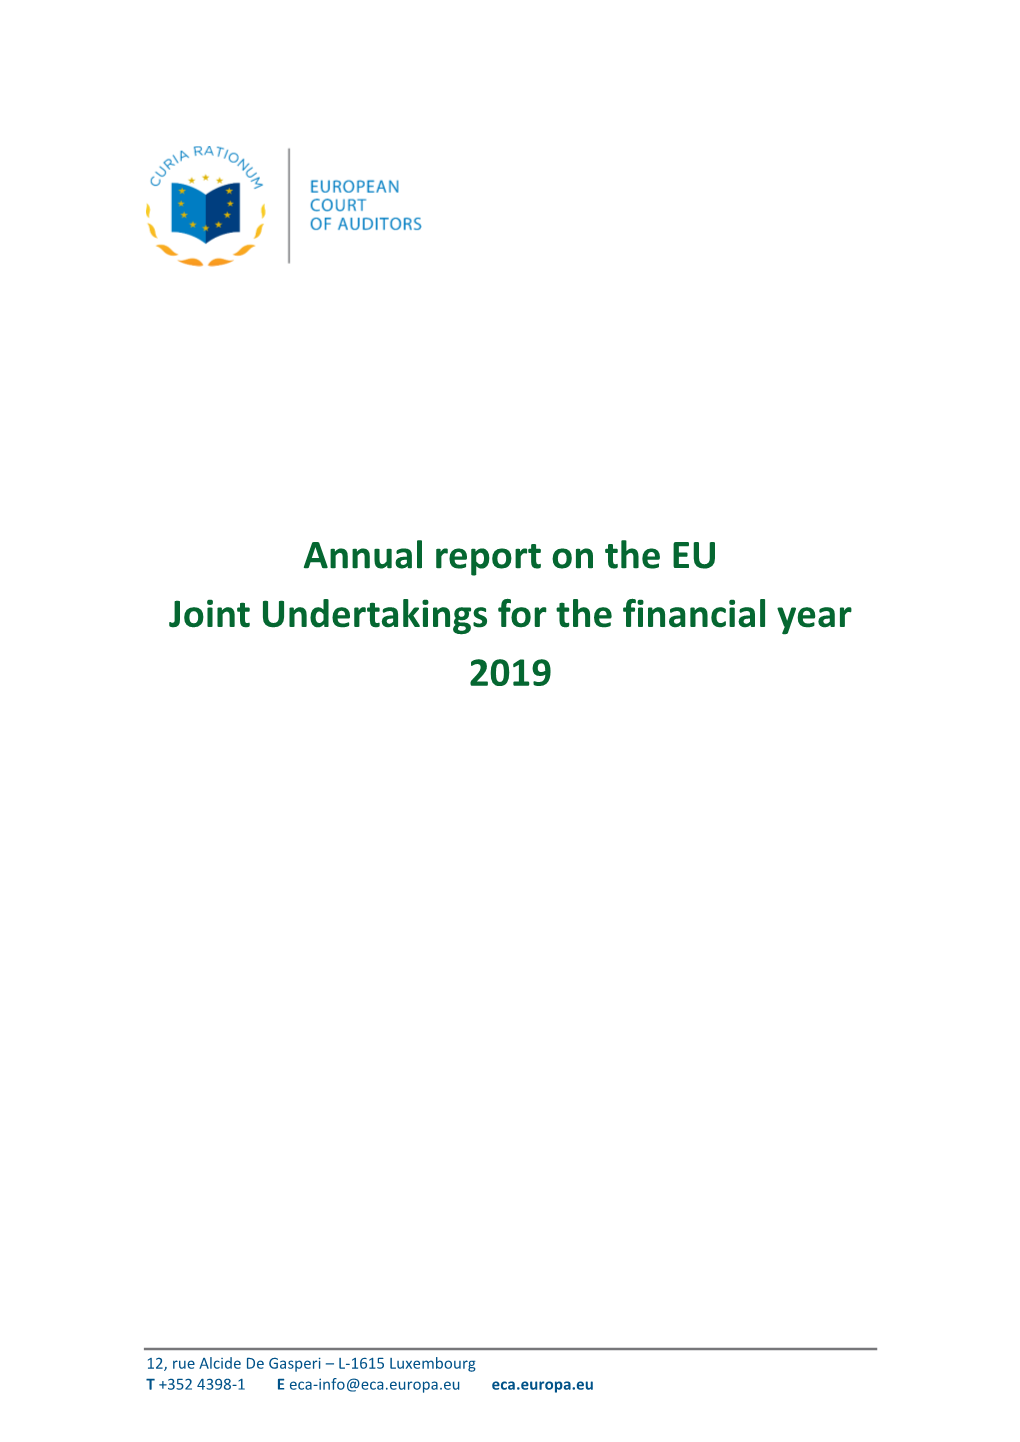 Annual Report on Th EU Joint Undertaking for the Financial Year